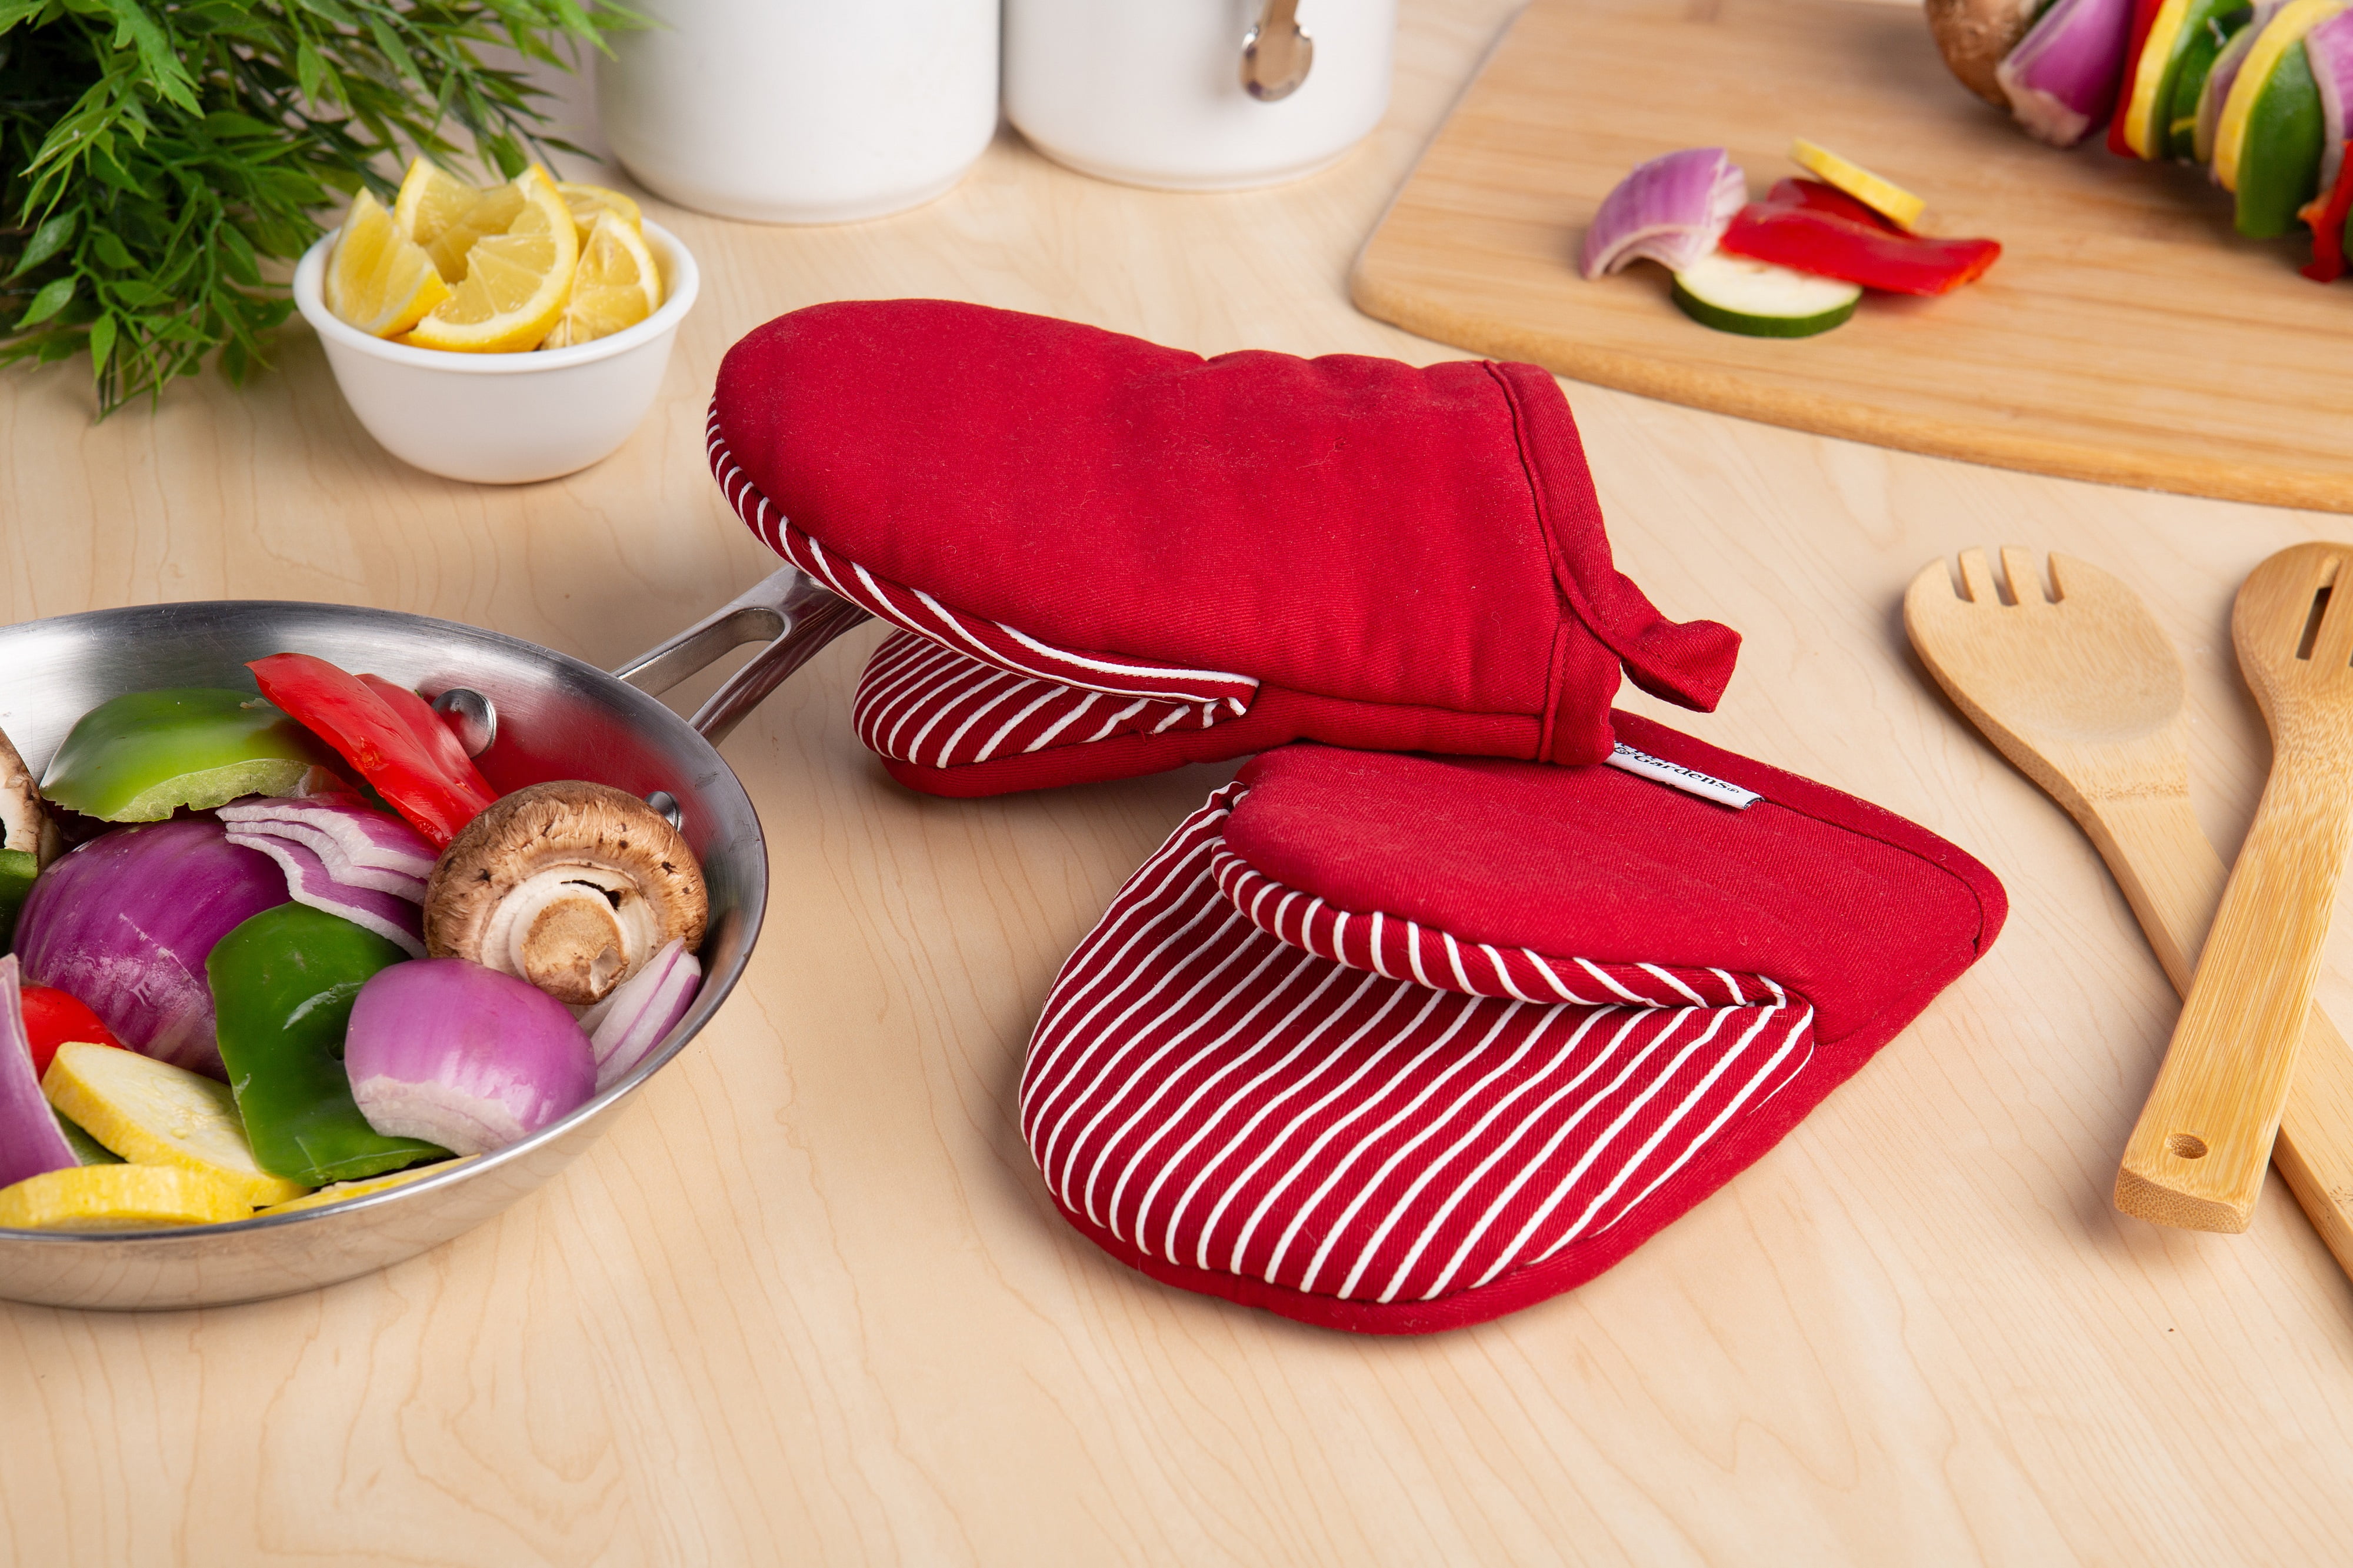 Ayada Red Oven Mitts, 2 Pack